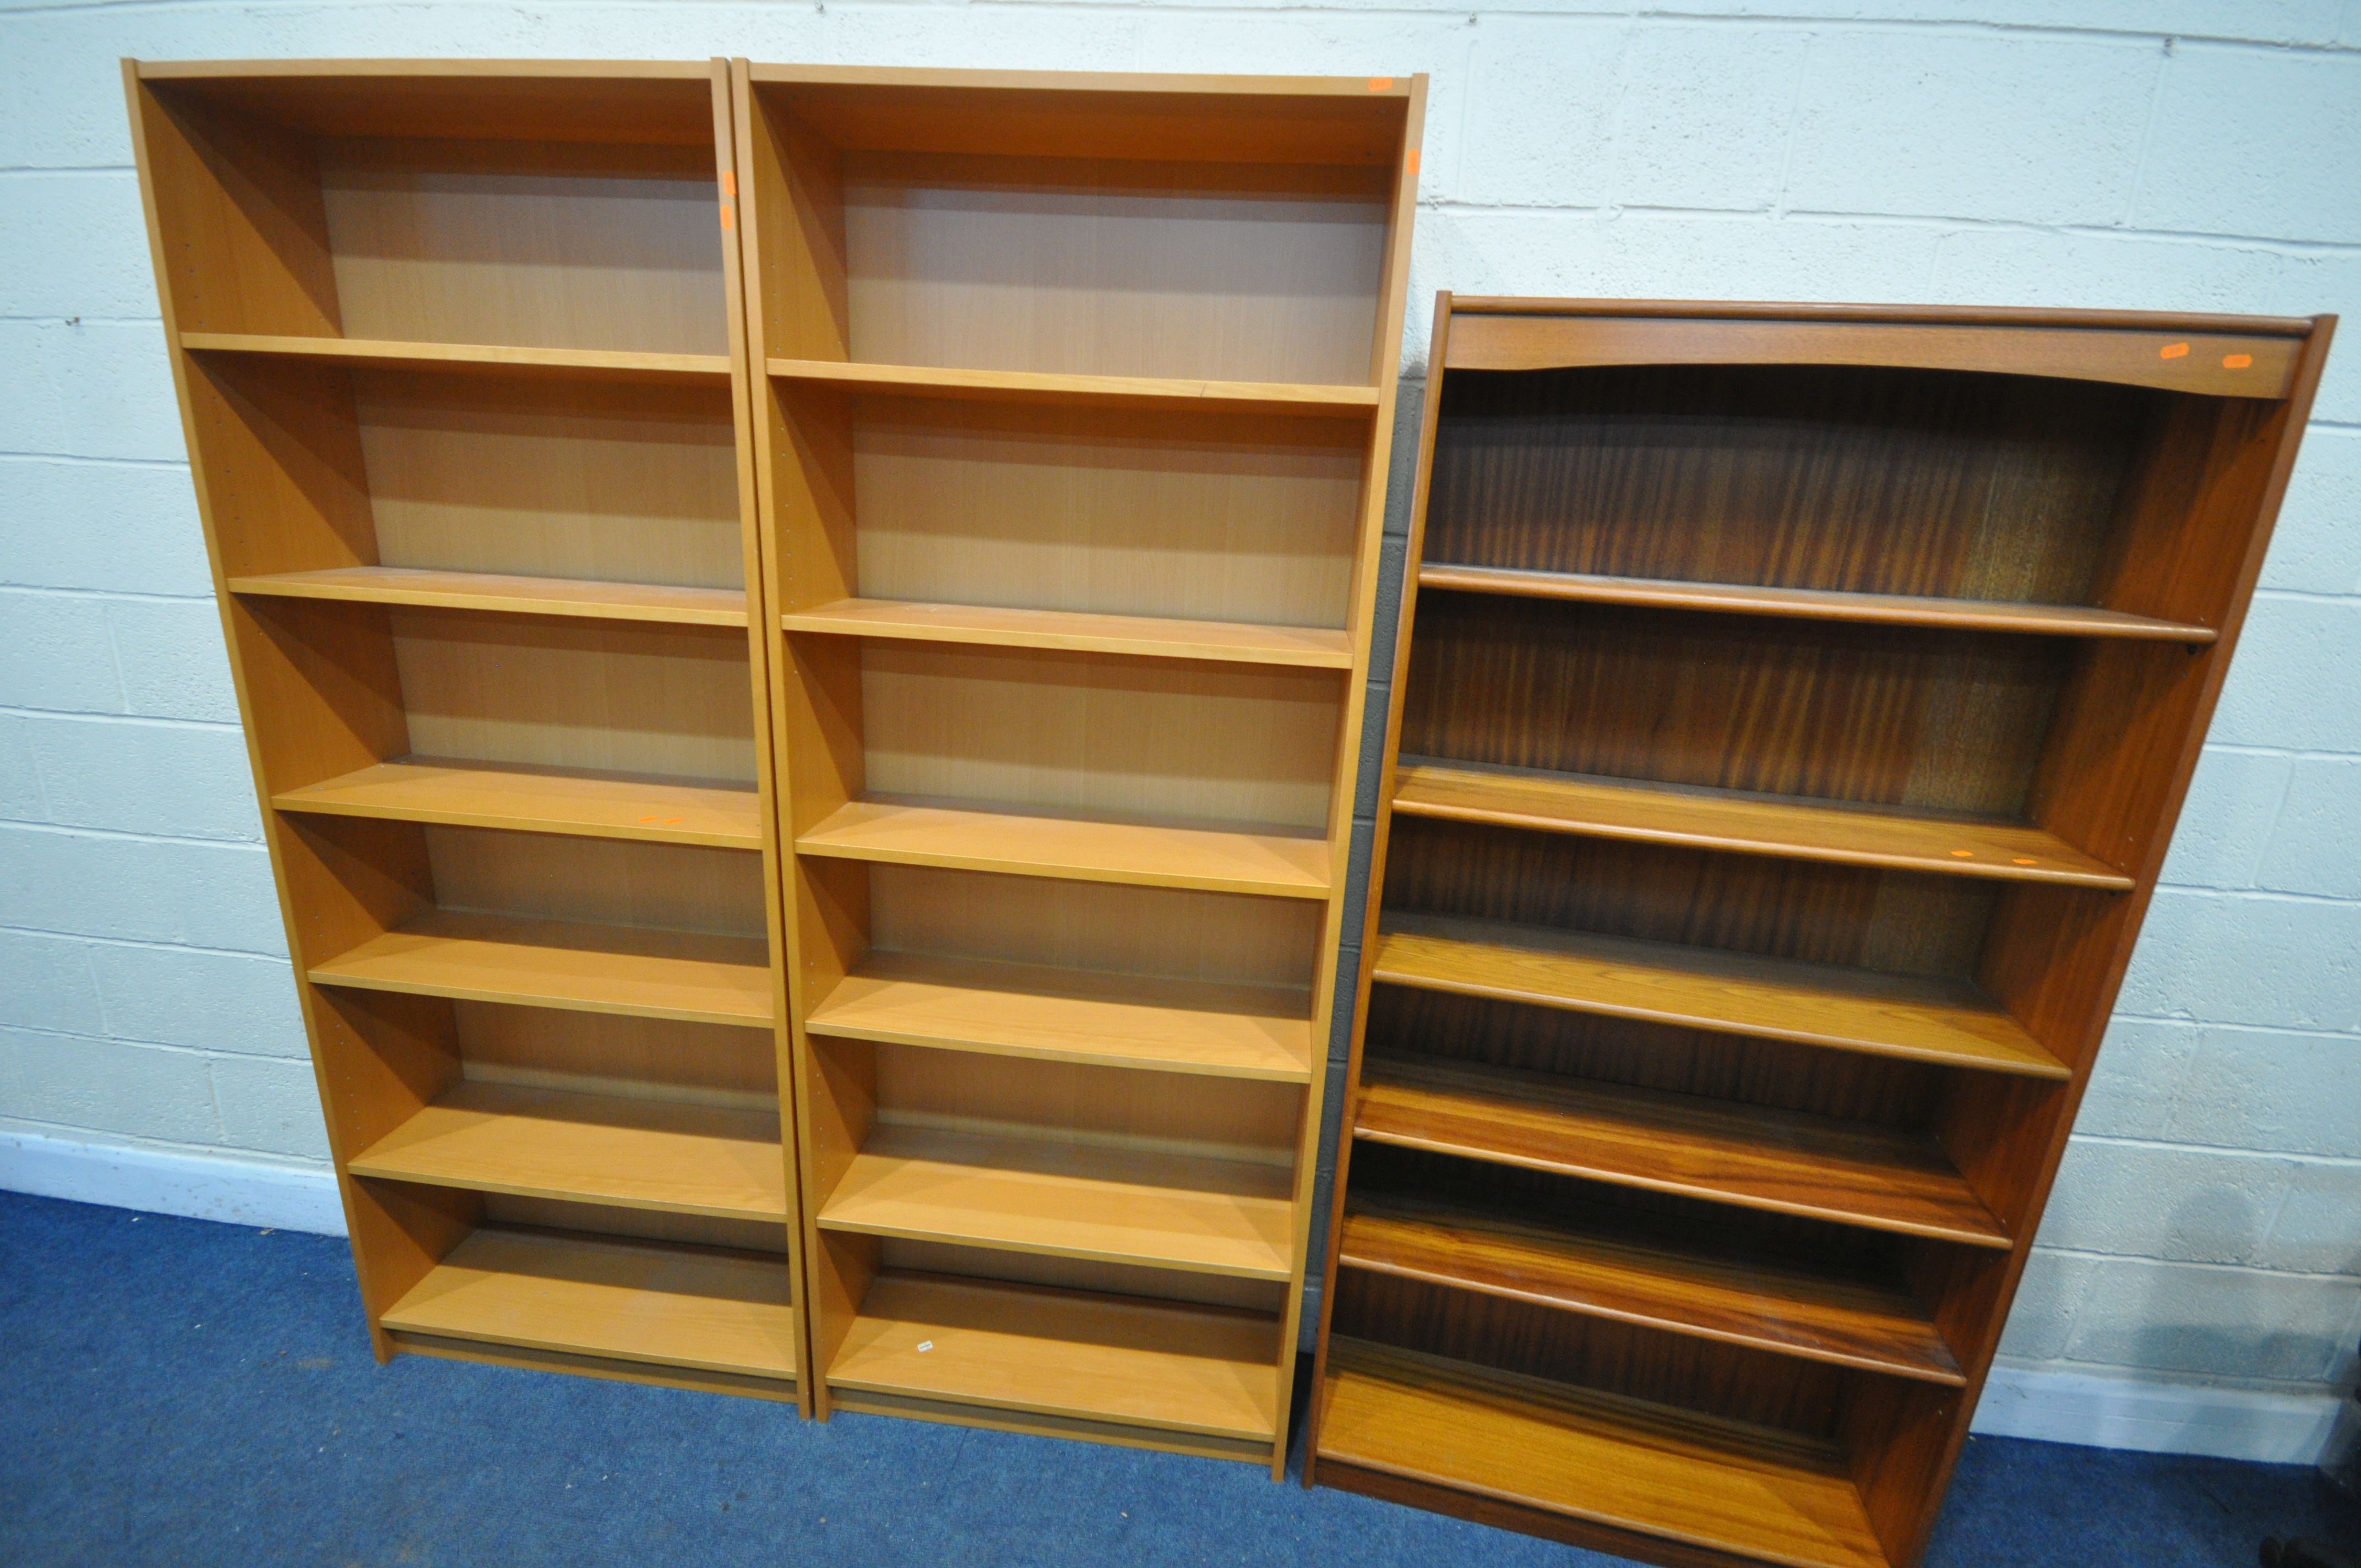 A PAIR OF MODERN BEECH OPEN BOOKCASES, width 80cm x depth 28cm x height 203cm, and a mid-century